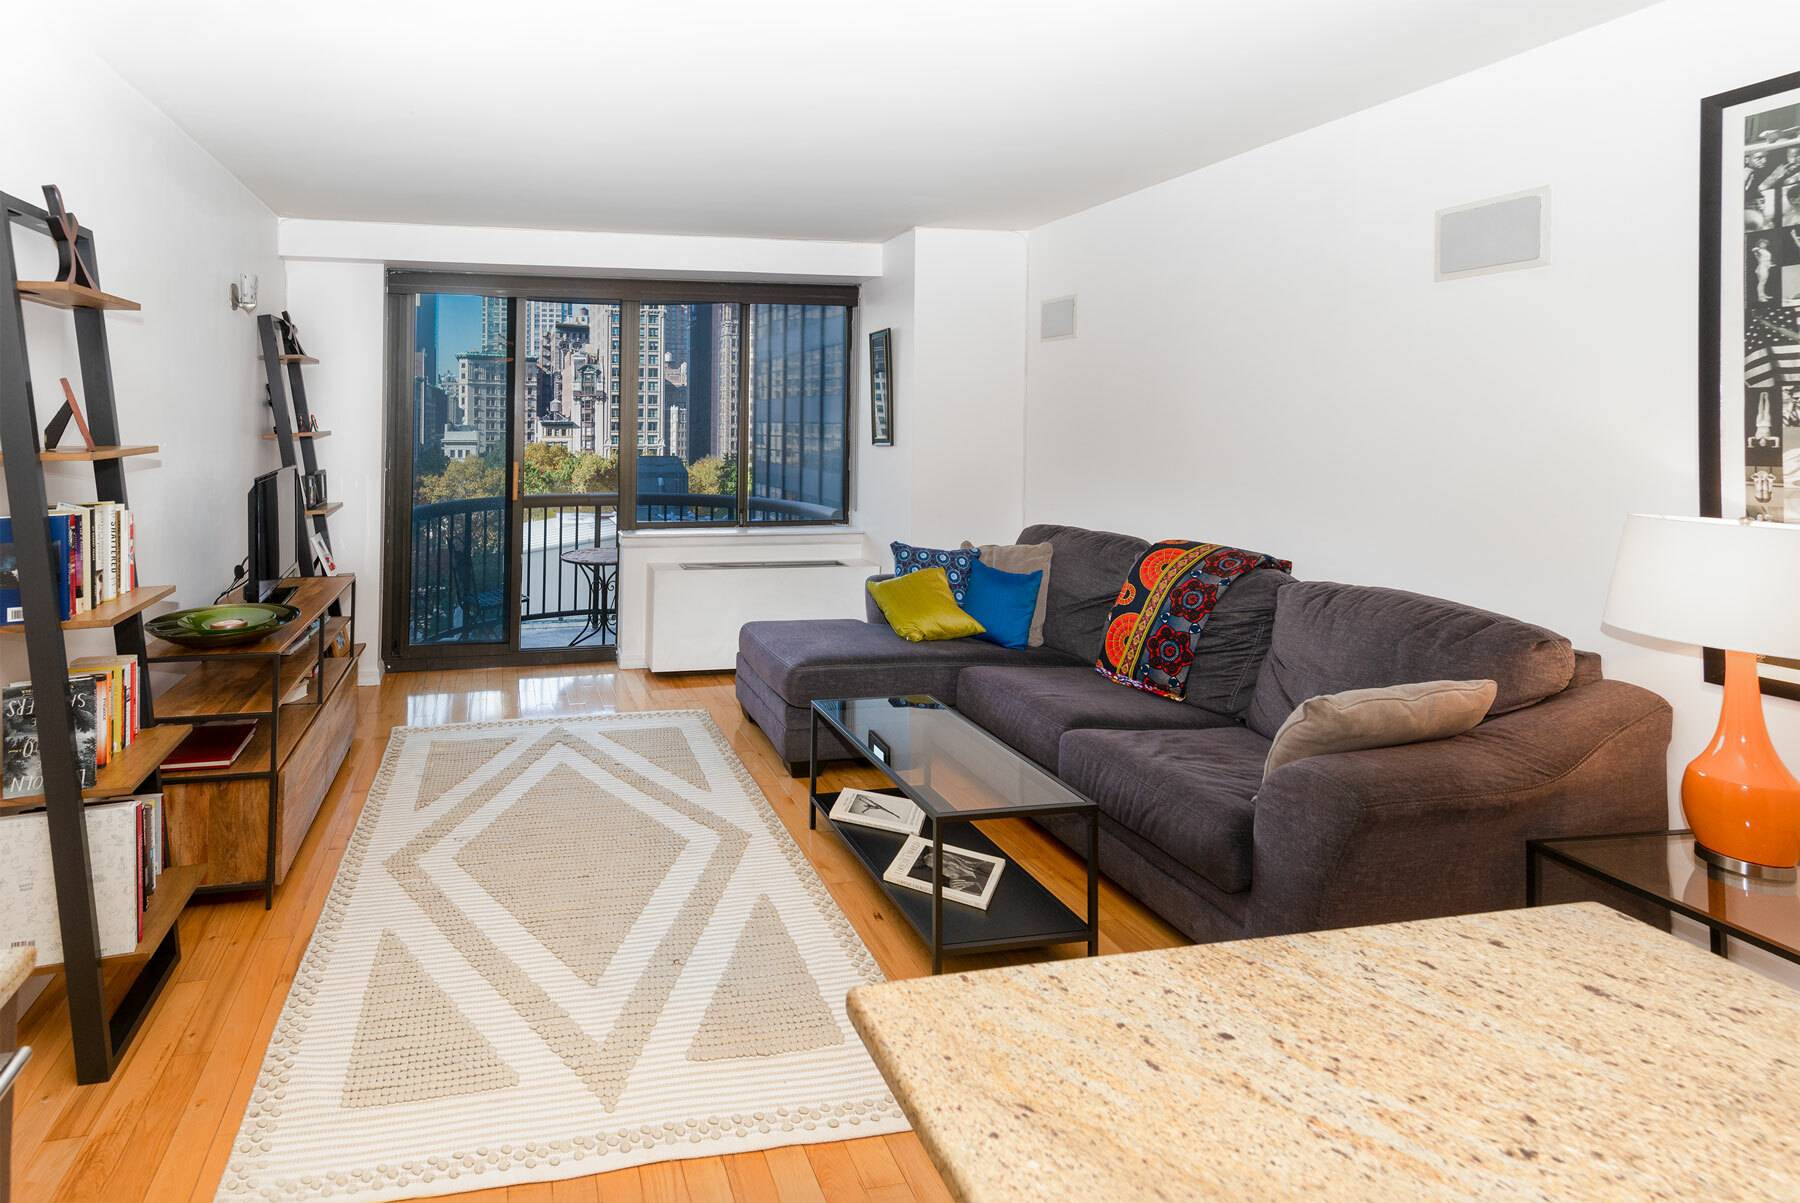 OPEN HOUSE SUNDAY JAN 24TH TO 17TH 11 12pm BY APPT ONLY WITH 24 HR NOTICE Perfectly situated at the crossroads of NoMad amp ; The Flatiron District, this triple ...